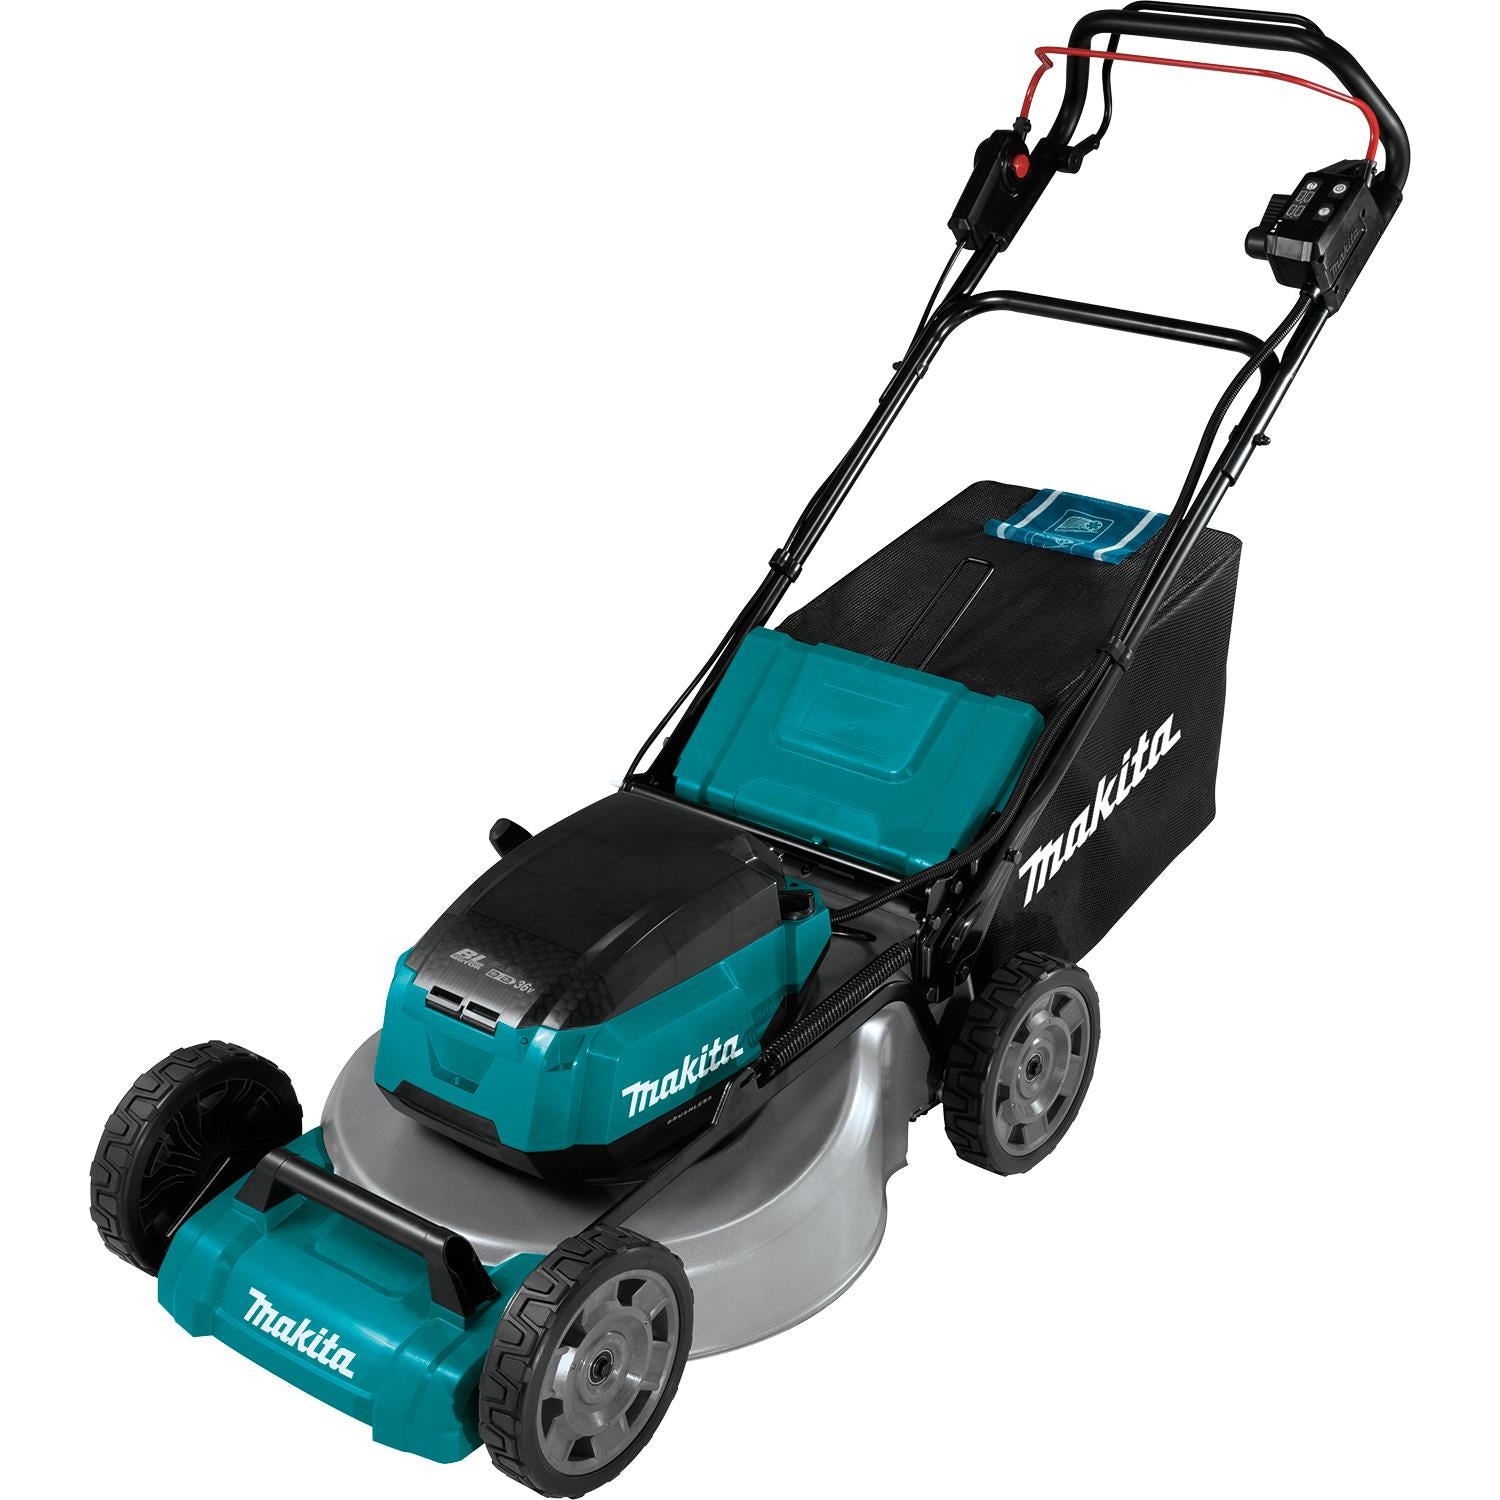 Makita 18" Self-Propelled Commercial Lawn Mower 36v, Tool Only